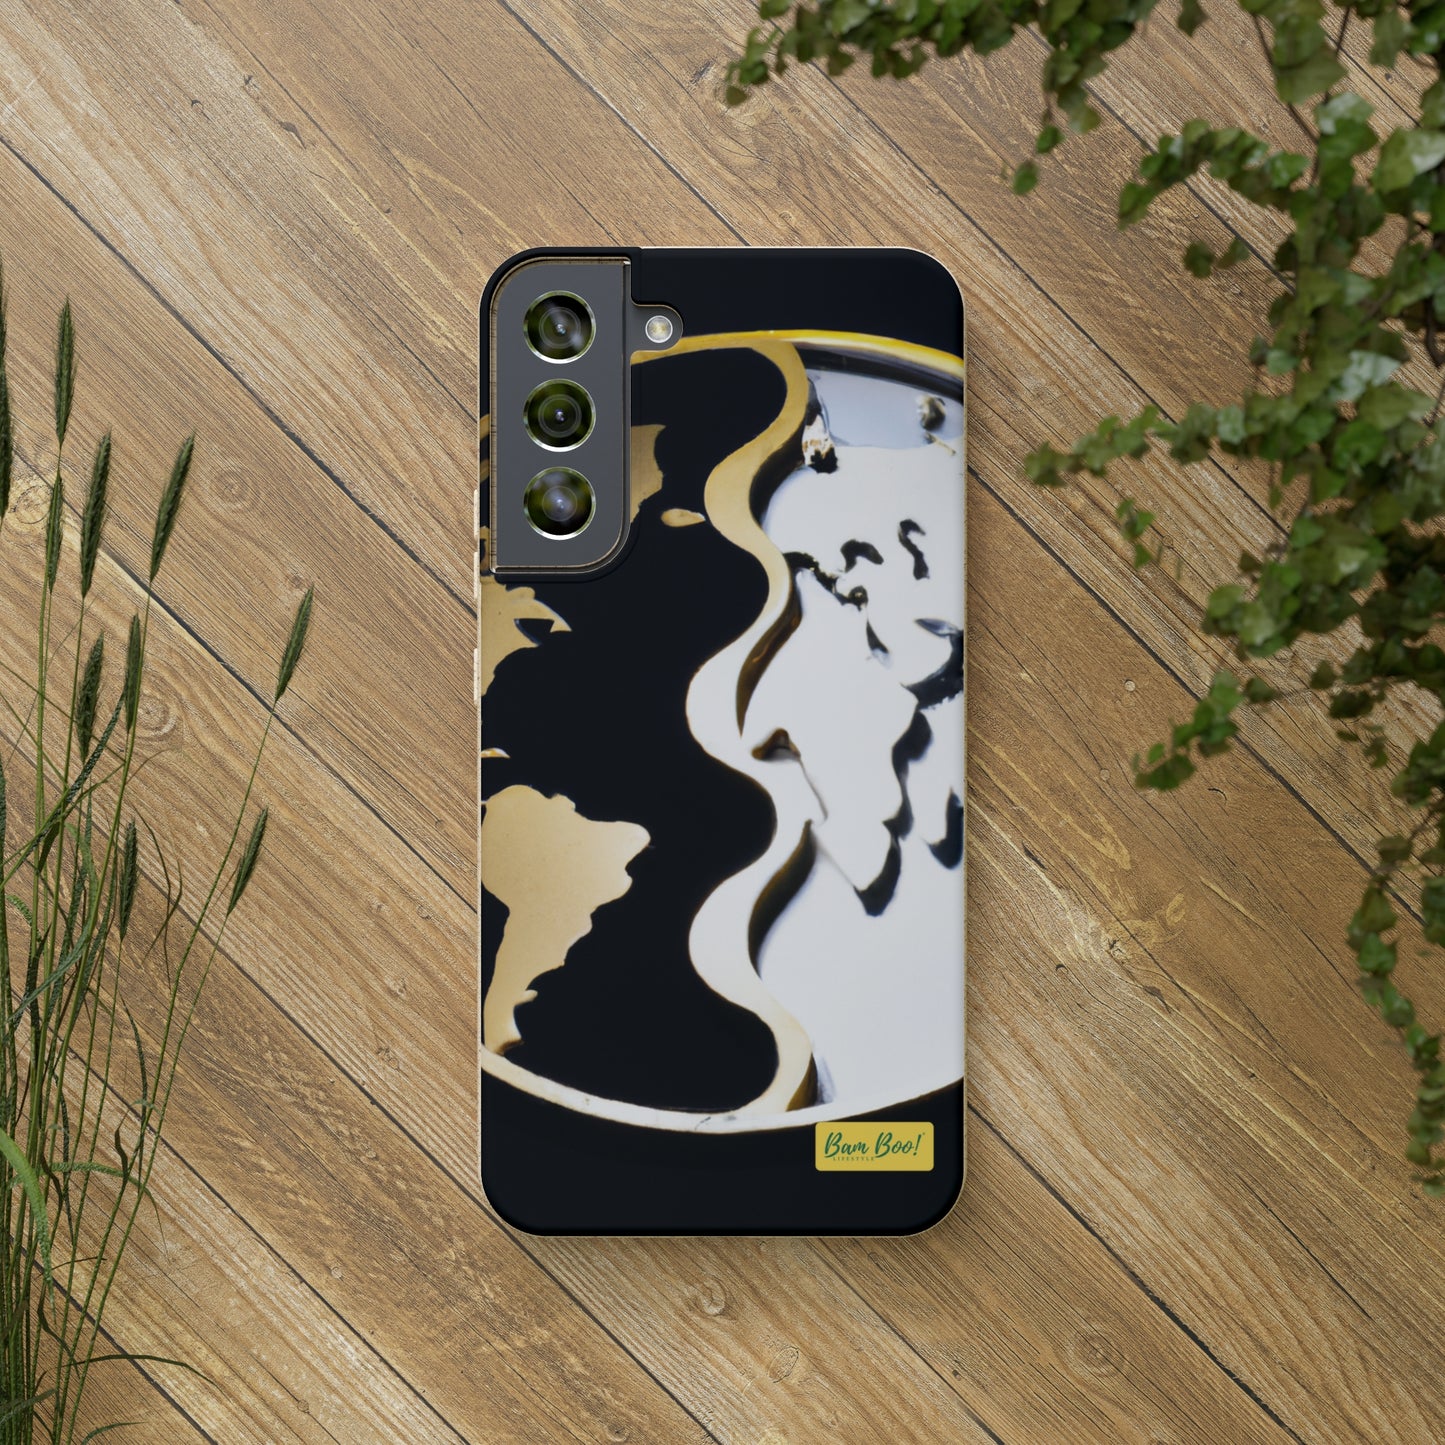 "United in Diversity: A Photomontage Exploration" - Bam Boo! Lifestyle Eco-friendly Cases